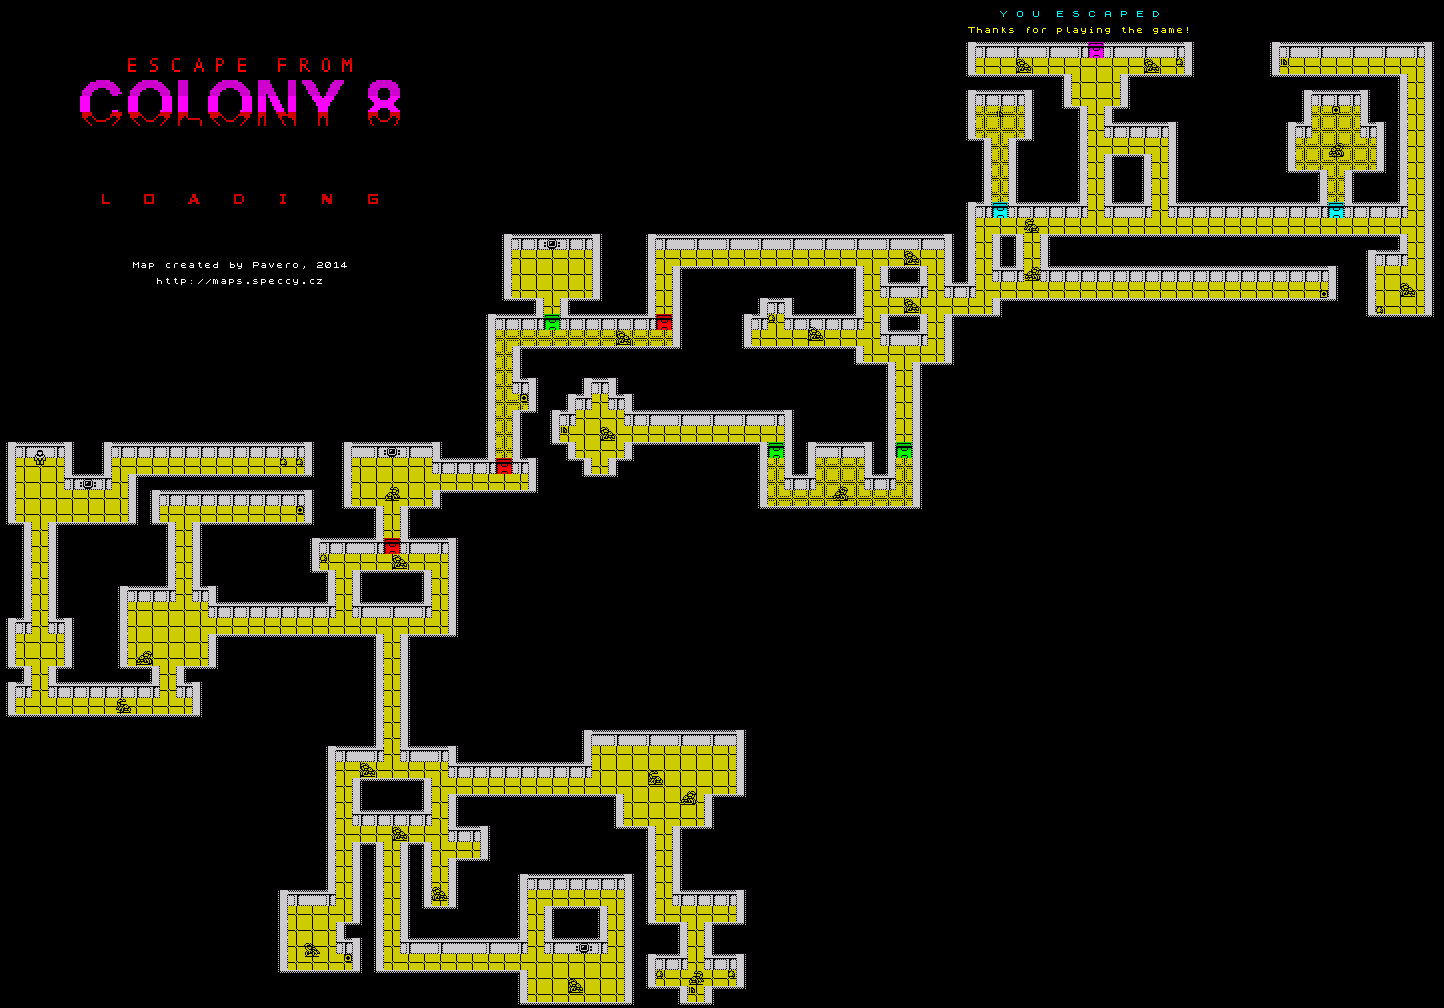 Escape from Colony 8 - The Map